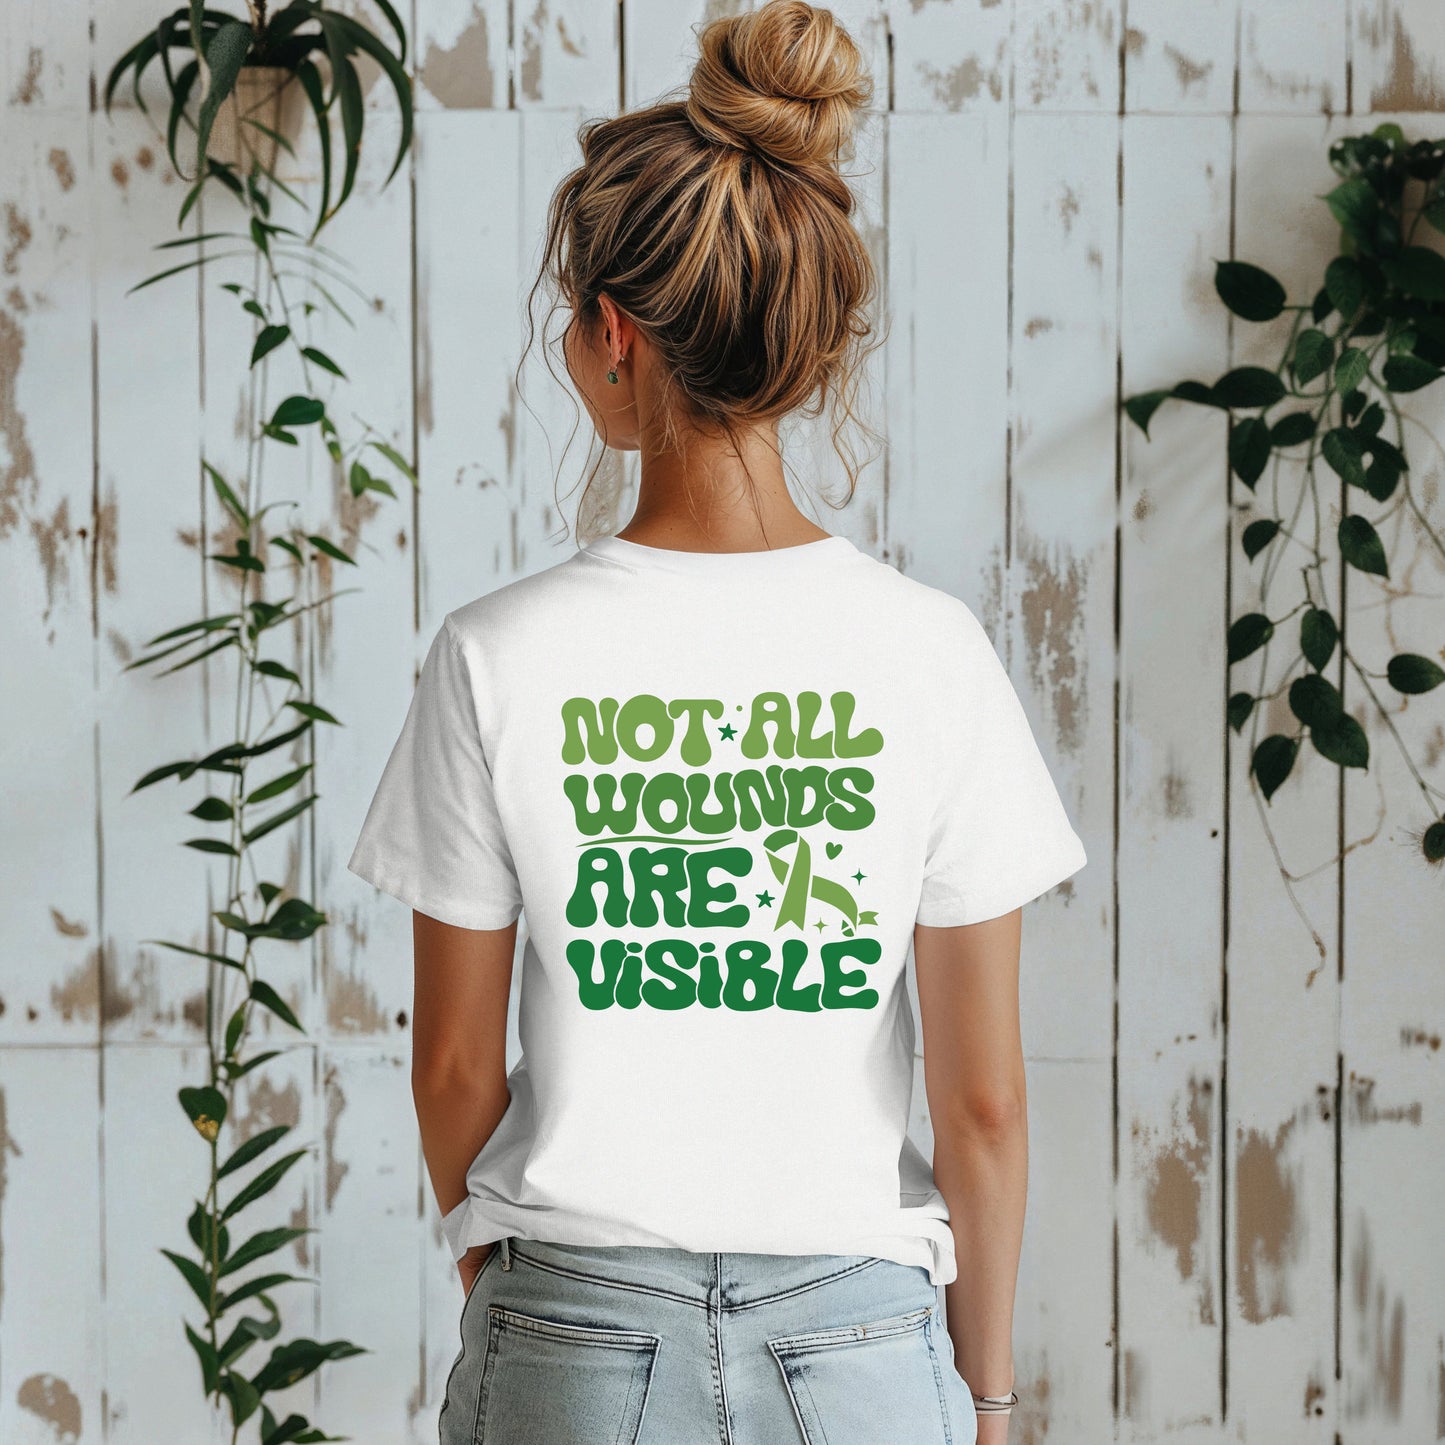 Not All Wounds Are Visible Tees | Mental Health Awareness Sweater | Motivational Tshirts